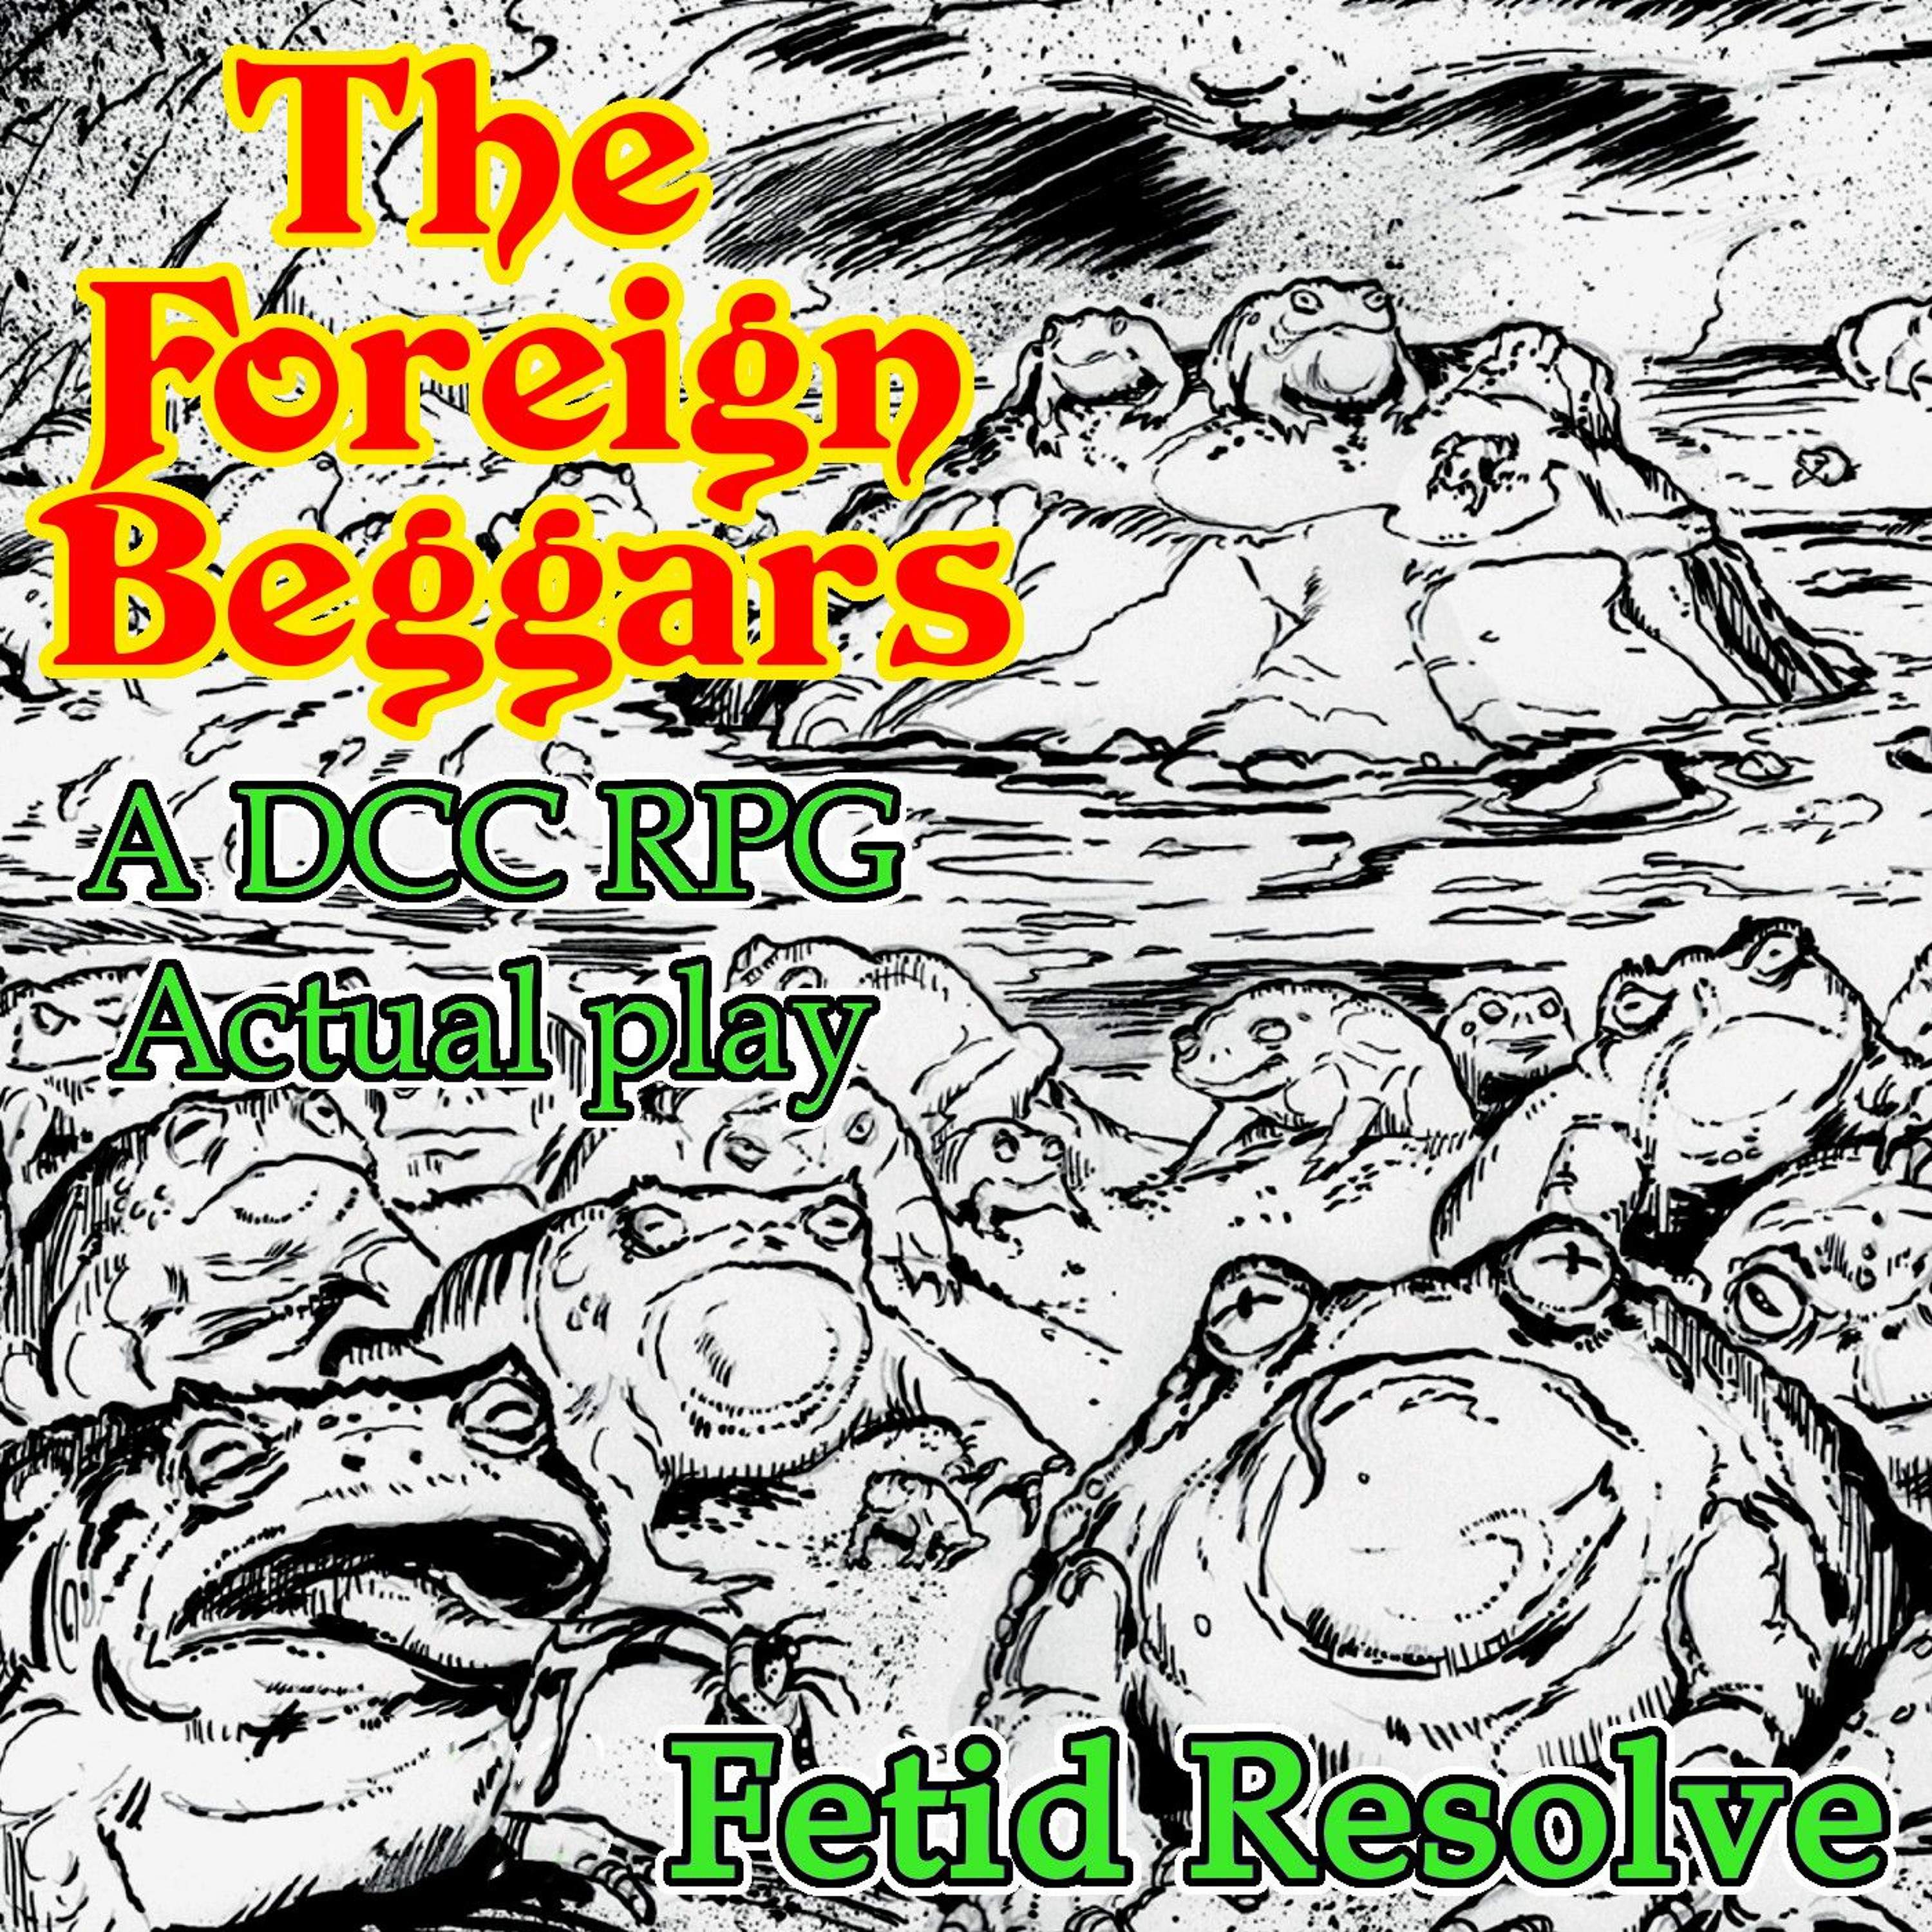 The Foreign Beggars 06 - Fetid Resolve (DCC RPG Actual play)